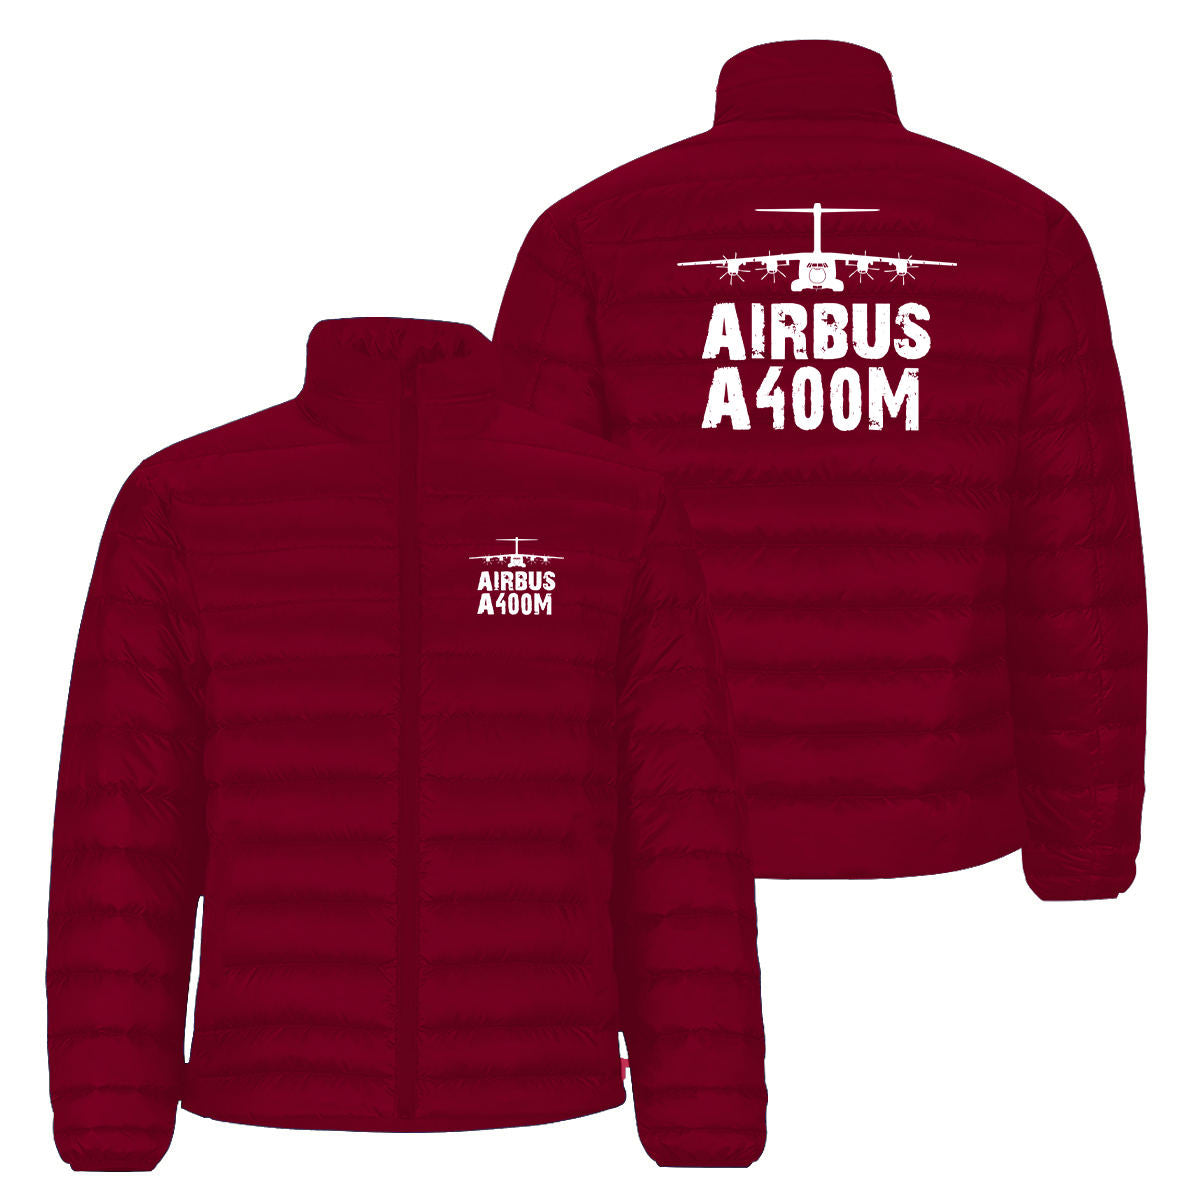 Airbus A400M & Plane Designed Padded Jackets